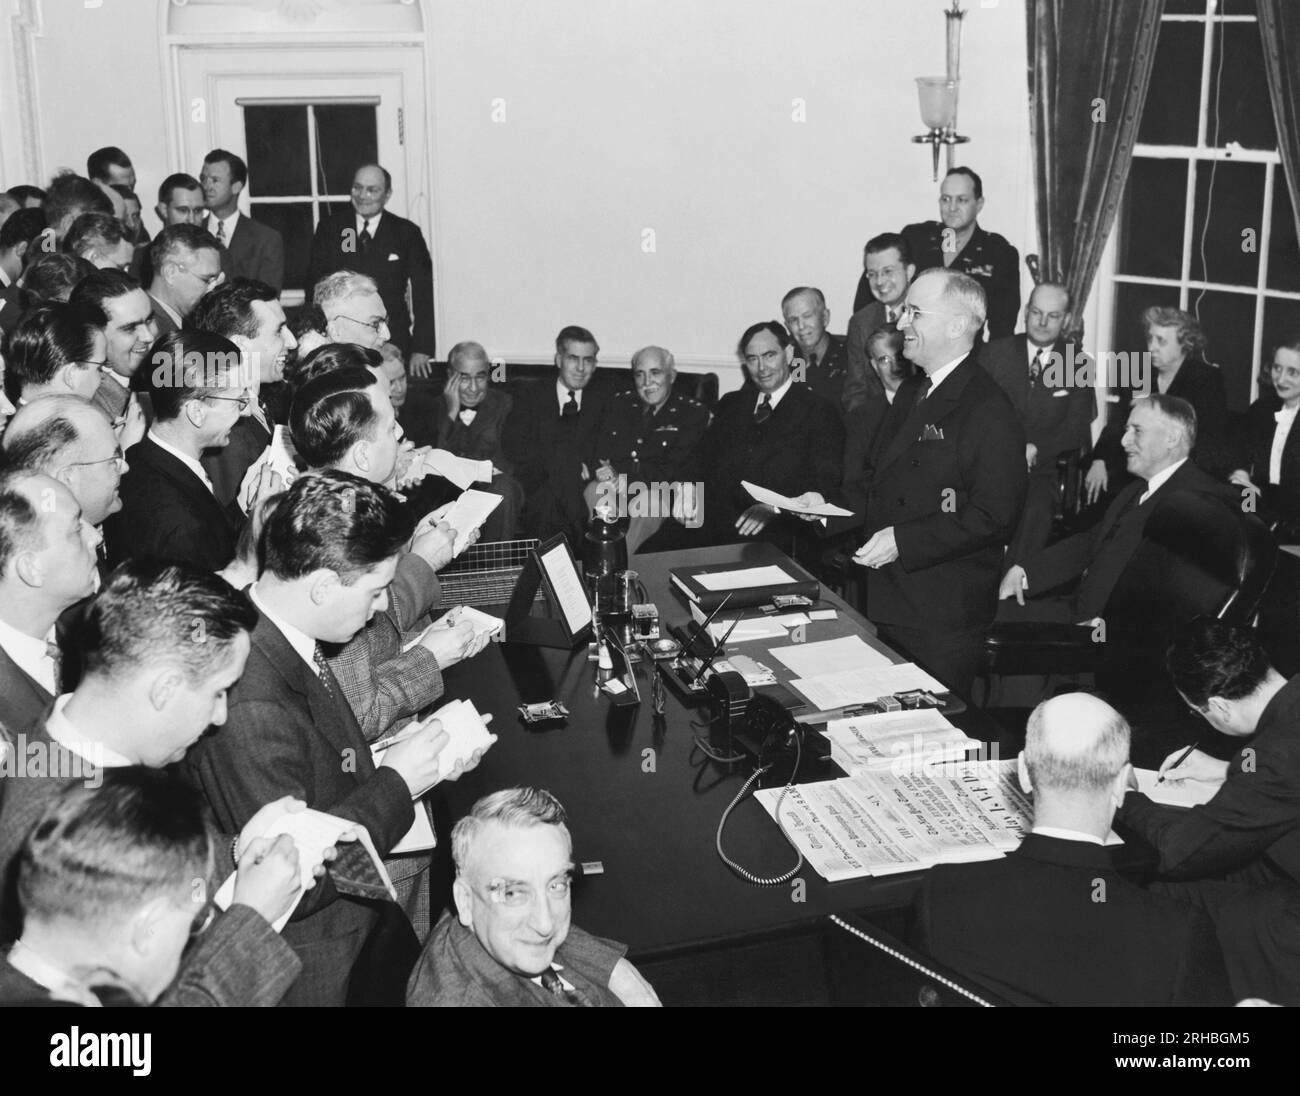 Washington, D.C.: May 8, 1945 President Truman as he reads the Victory Proclamation to the press corps, officially announcing the end of the war in Europe. Gathered around are L-R in rear: Elmer Davis (hand to head); Secretary of Commerce Henry A. Wallace; Major General Philip Fleming; Rep. Joseph Martin; General of the Army George C. Marshall; J. Leonard Reinsch; Col. Harry Vaughan; John W. Snyder; Mrs. Truman; Margaret Truman; and Secretary of War Henry L Stimson. In center foreground looking at camera is Fred m. Vinson. Stock Photo